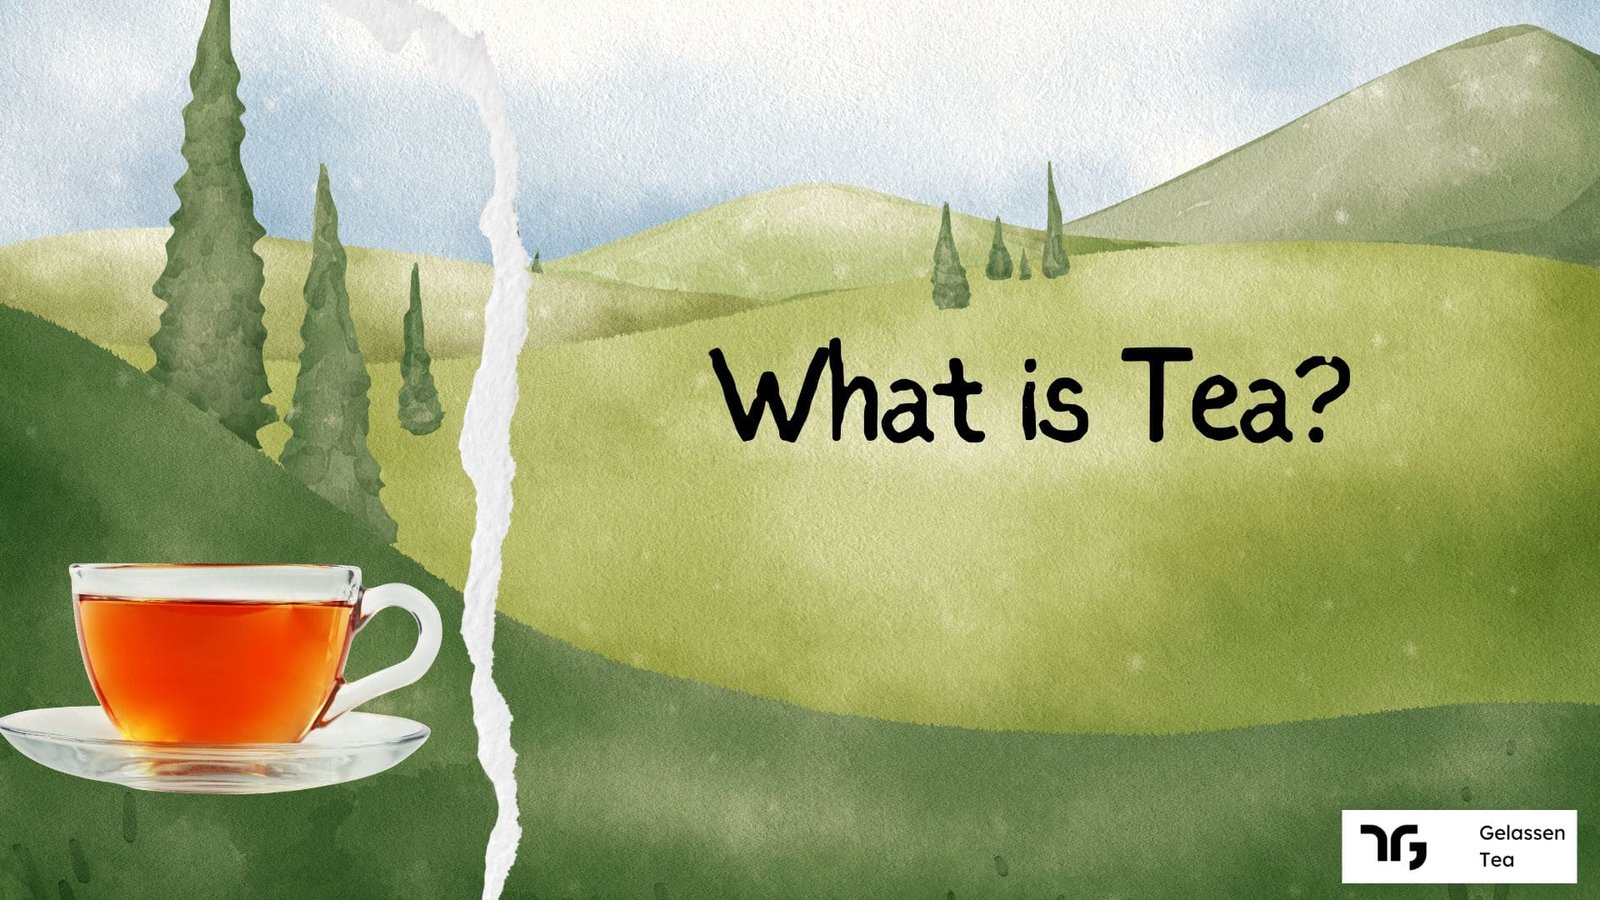 What is tea